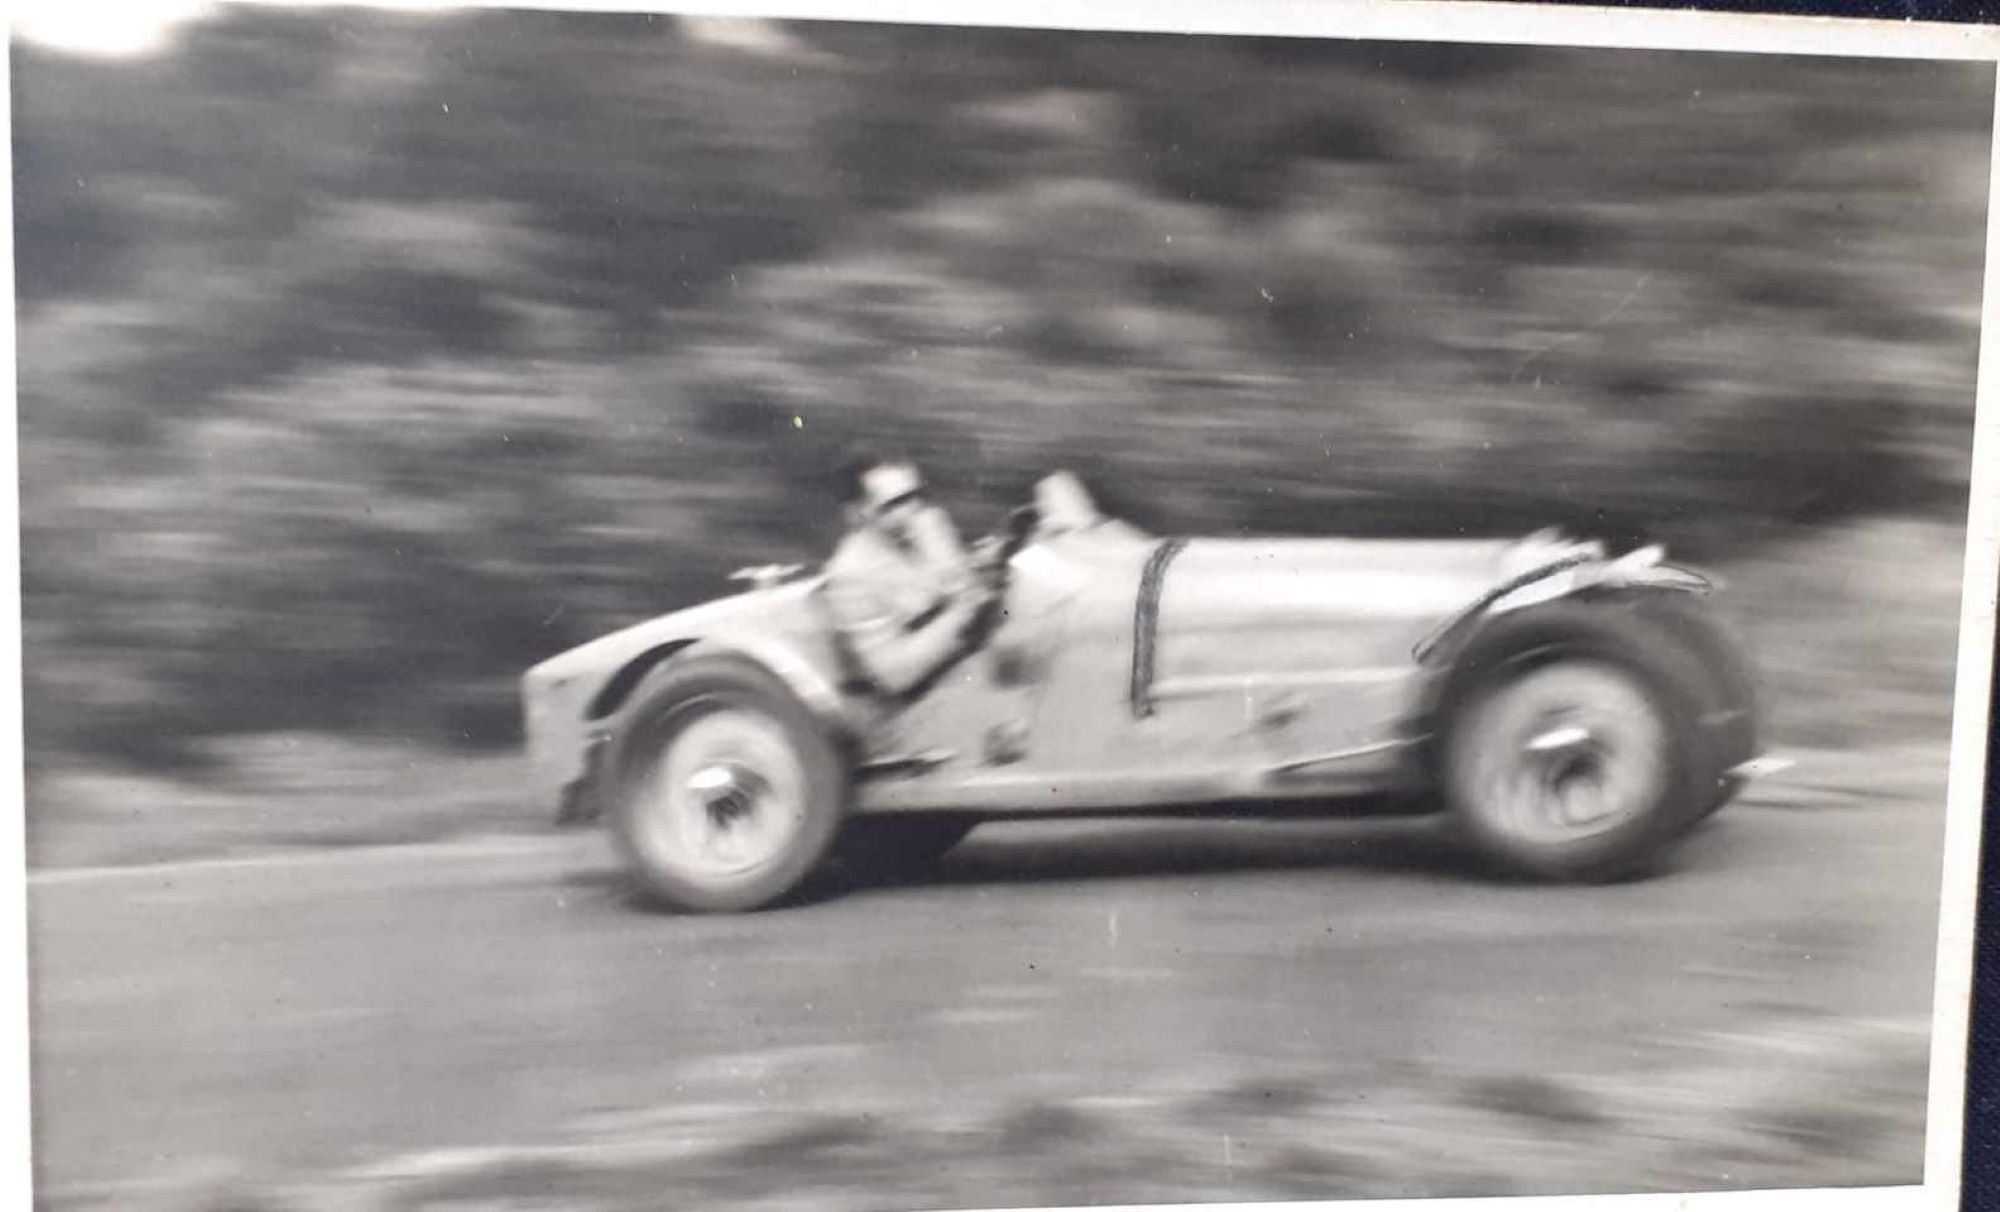 Name:  NSCC 1950 #0116 Bugatti T35 at speed - light colour 1950's - image Graeme Wells arch Anthony Wel.jpg
Views: 164
Size:  158.1 KB